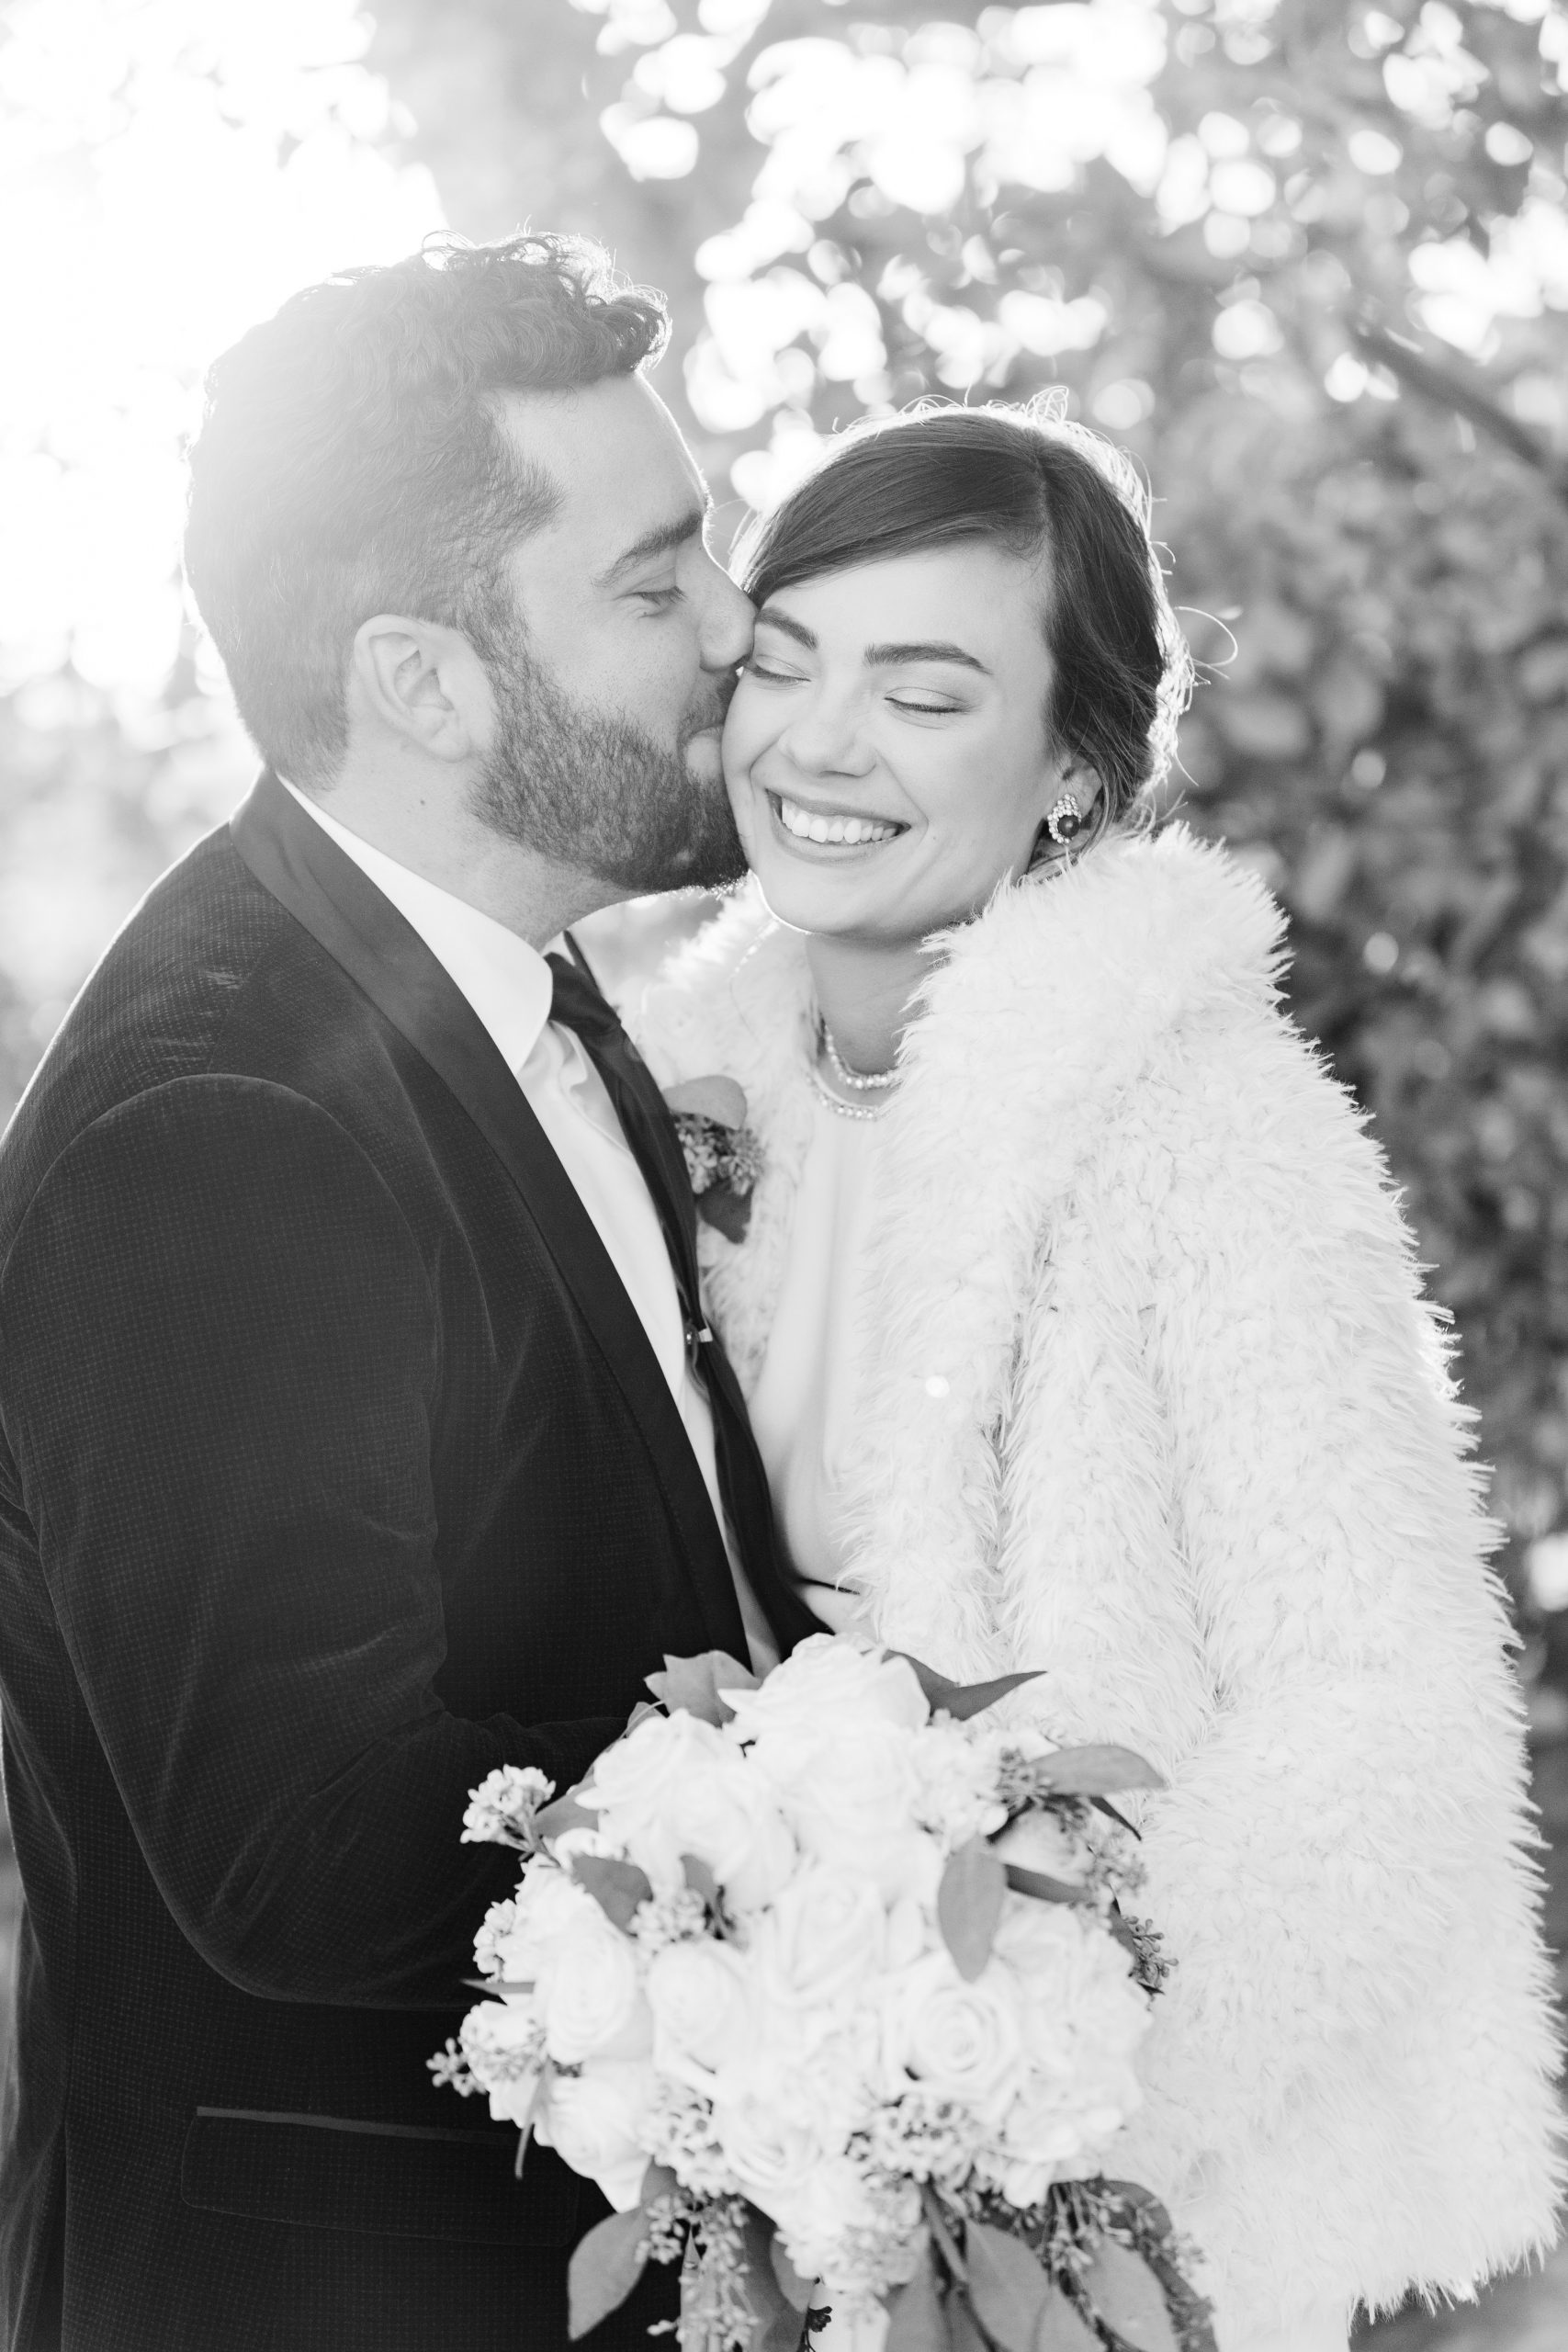 black and white image groom kissing bride on cheek smiling